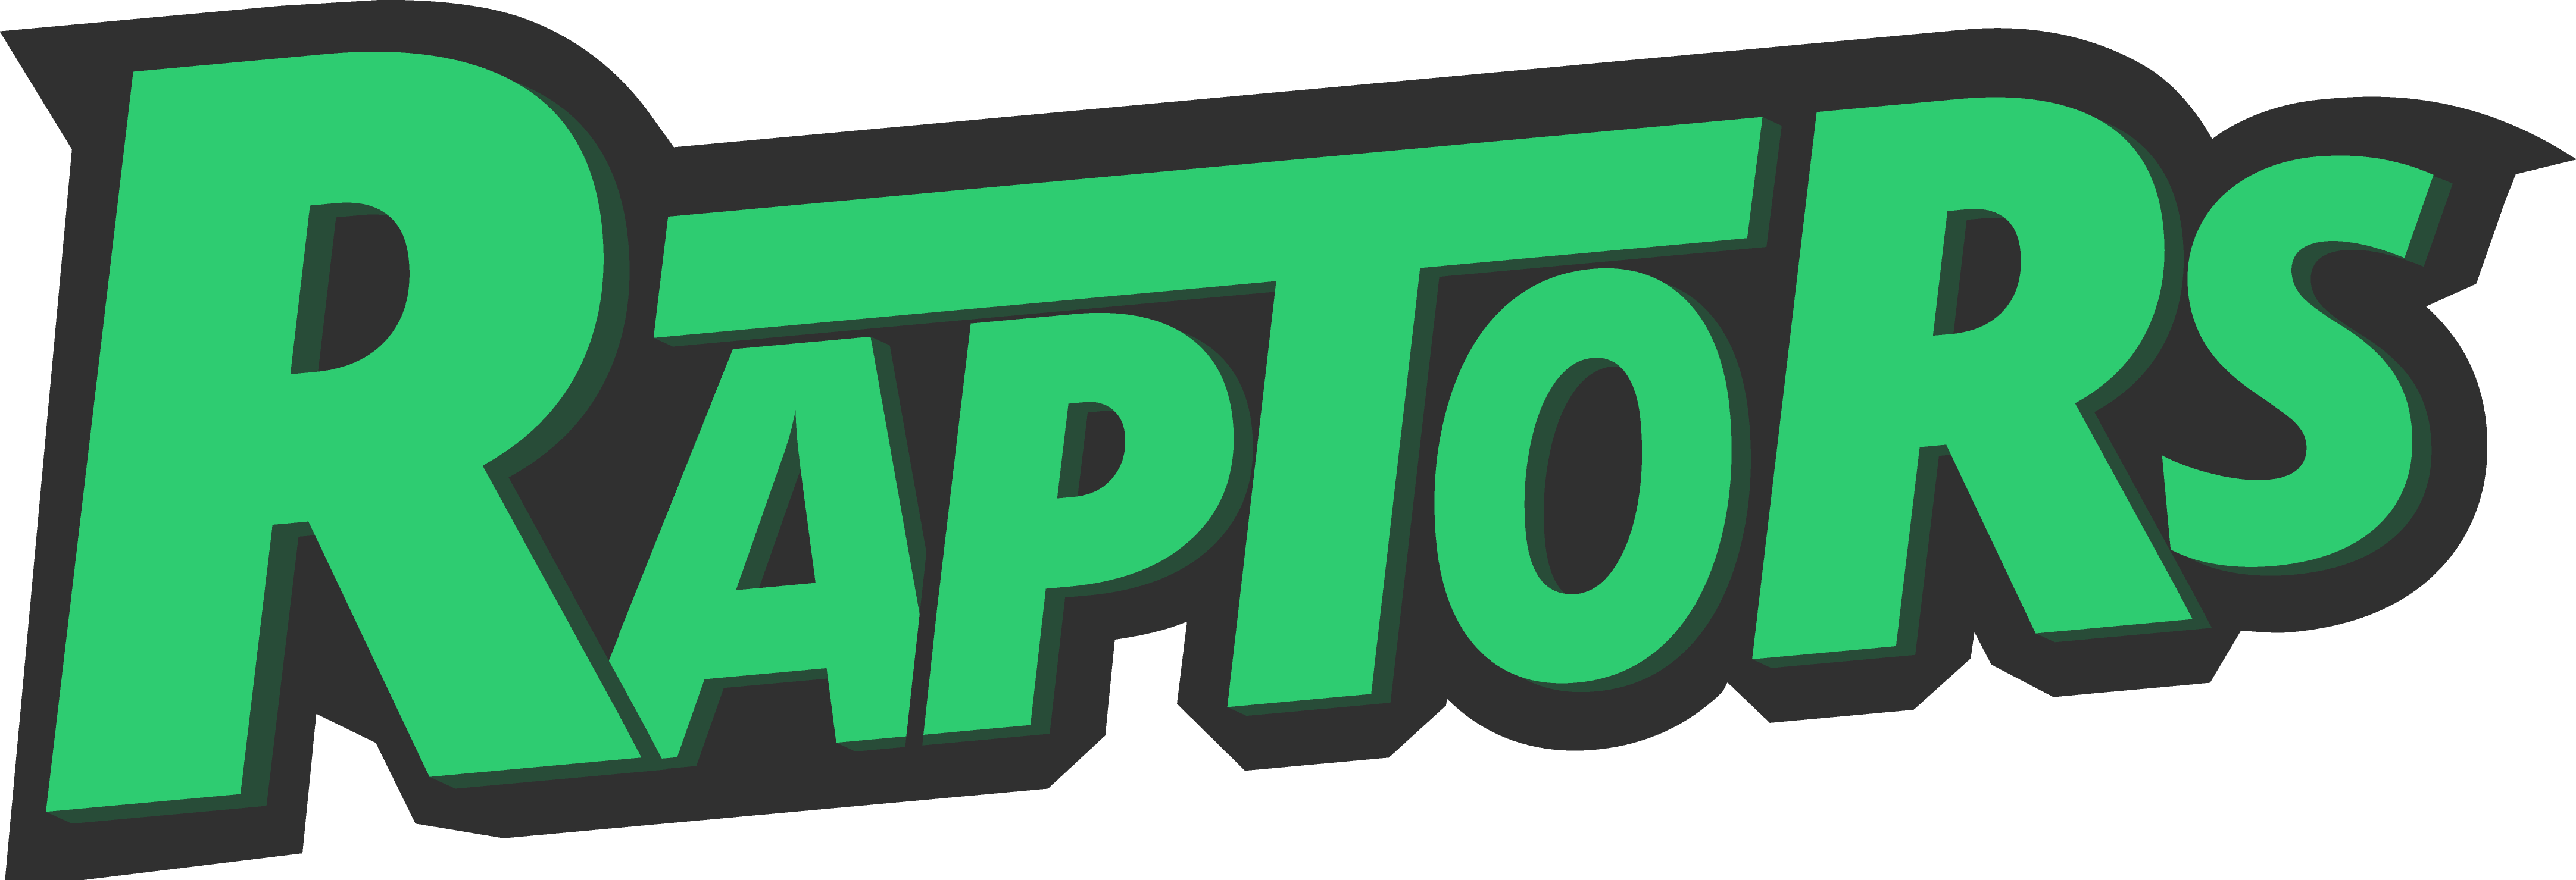 I Then Moved Onto The Graphic Of The Mascot, Starting - Raptor Mascot Logo (4327x1479)